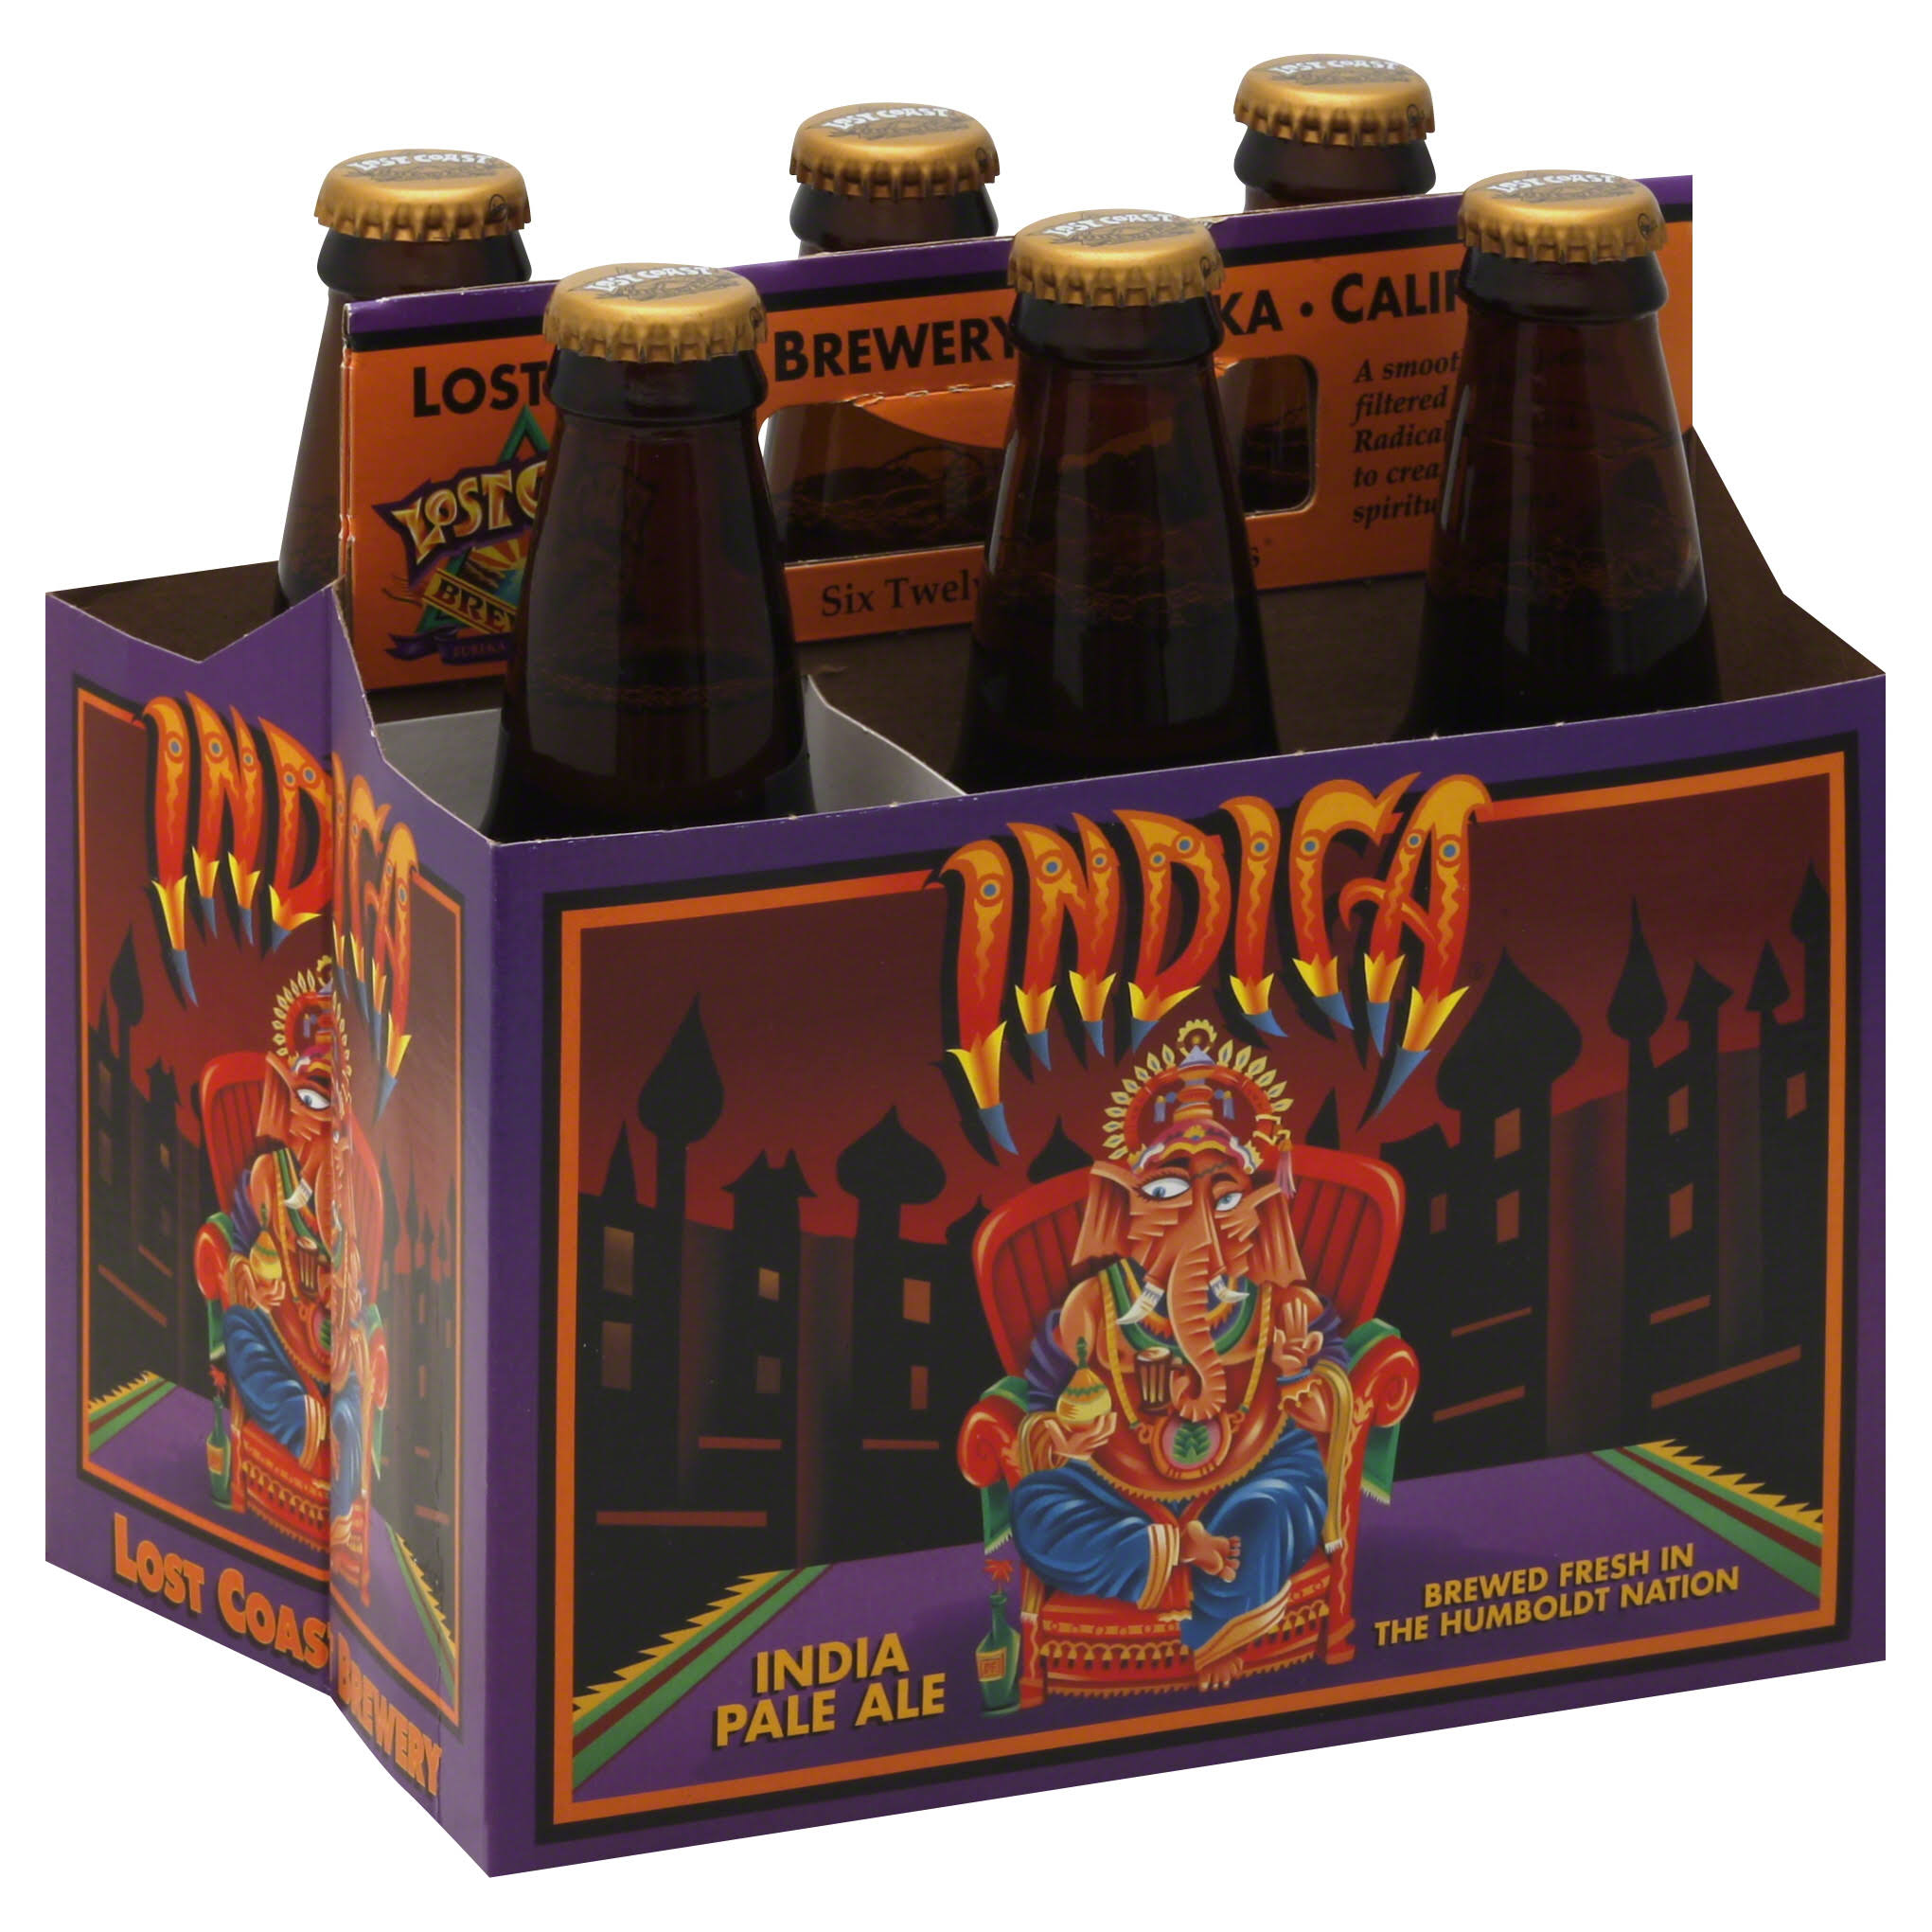 Lost Coast Indica India Pale Ale - 6 pack, 12 oz bottles